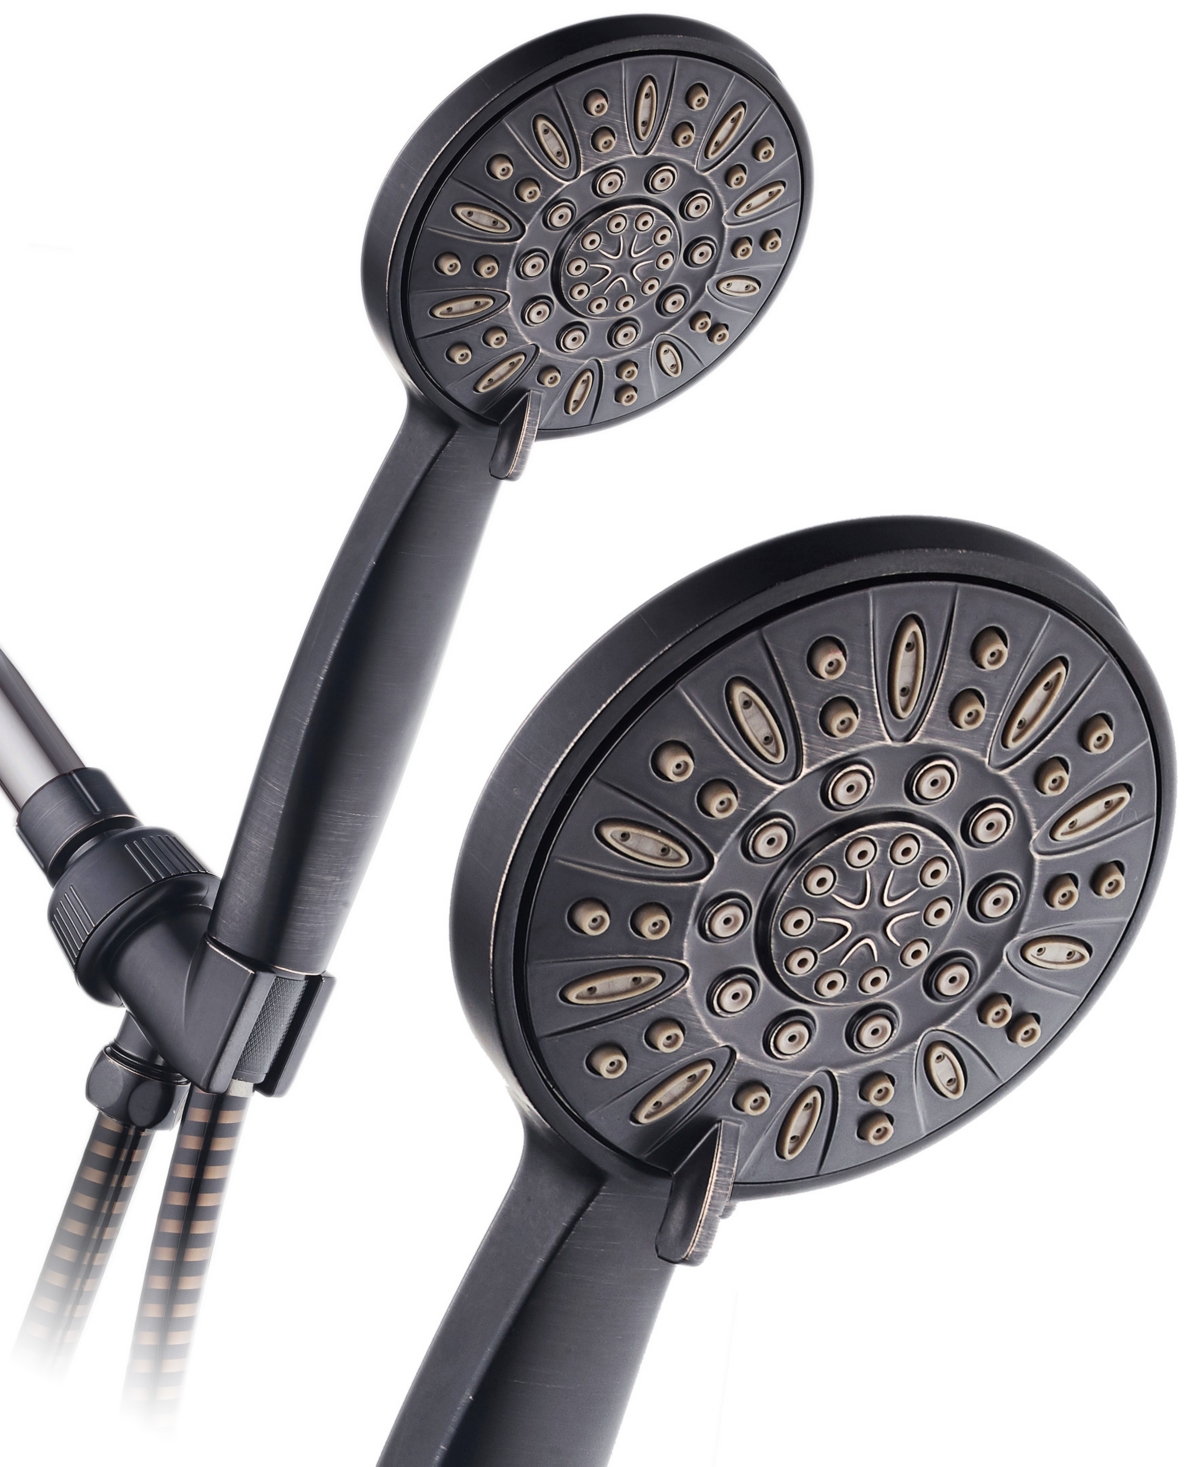 High-Pressure 6-setting Handheld Shower Head with Extra-long 6 Foot Hose - Oil Rubbed Bronze